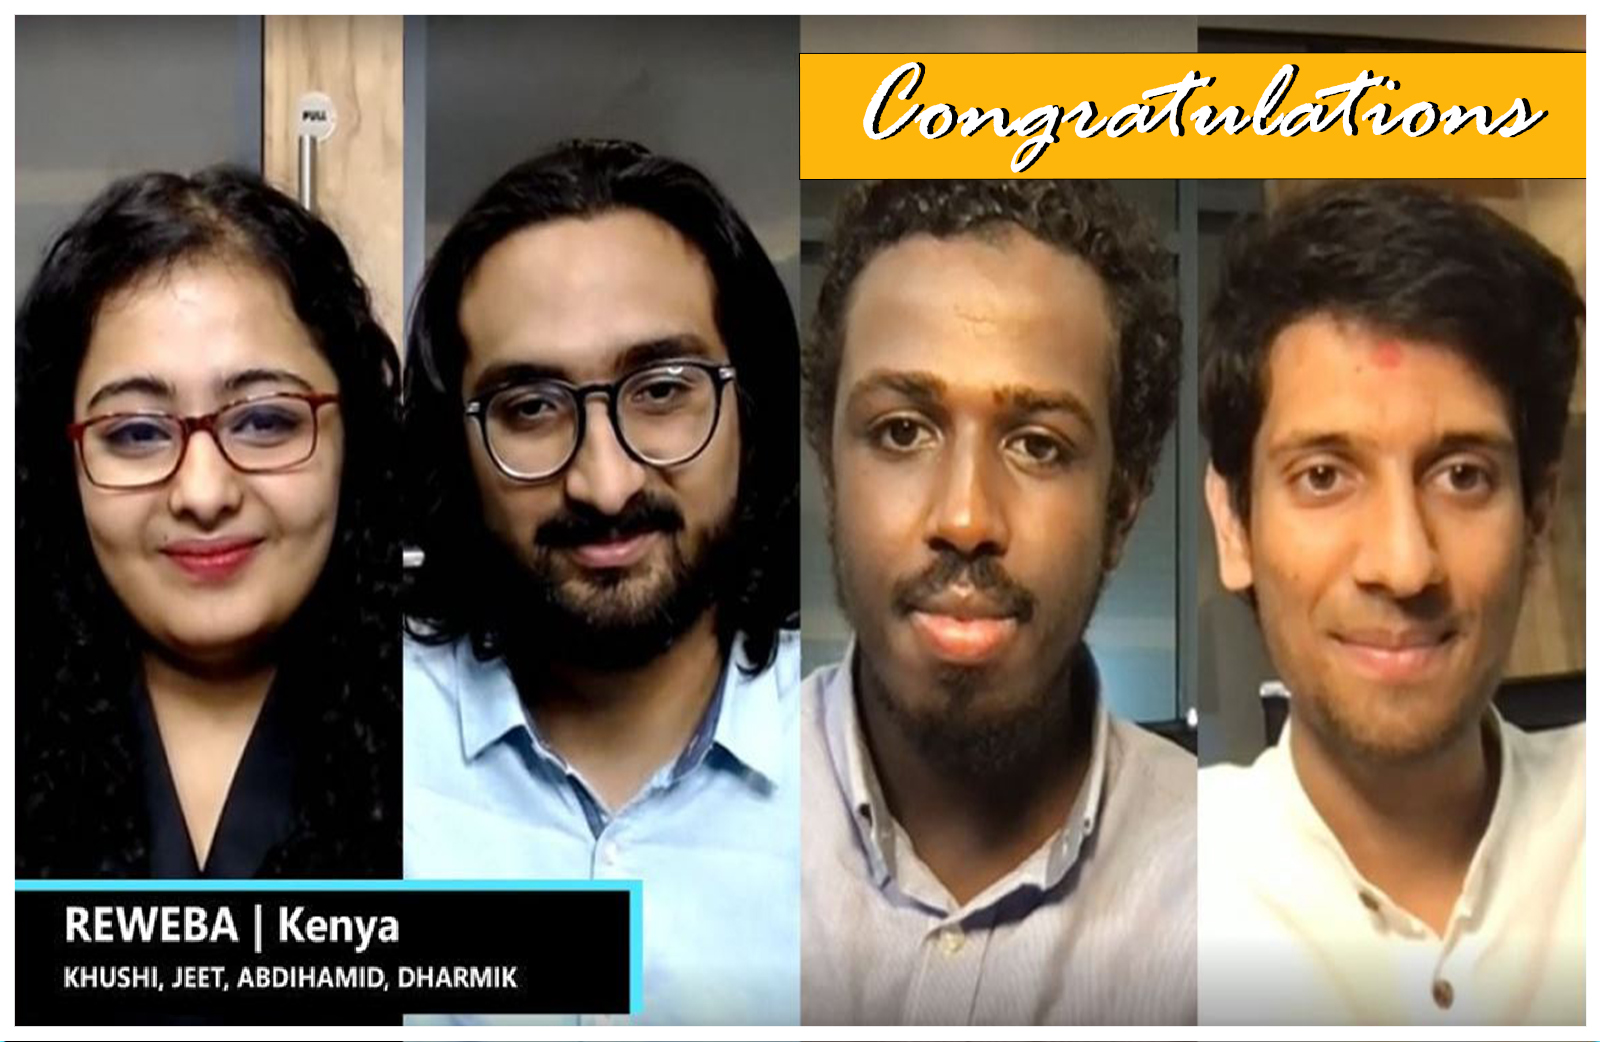 USIU Students Win Microsoft Grant For Their IoT Solution